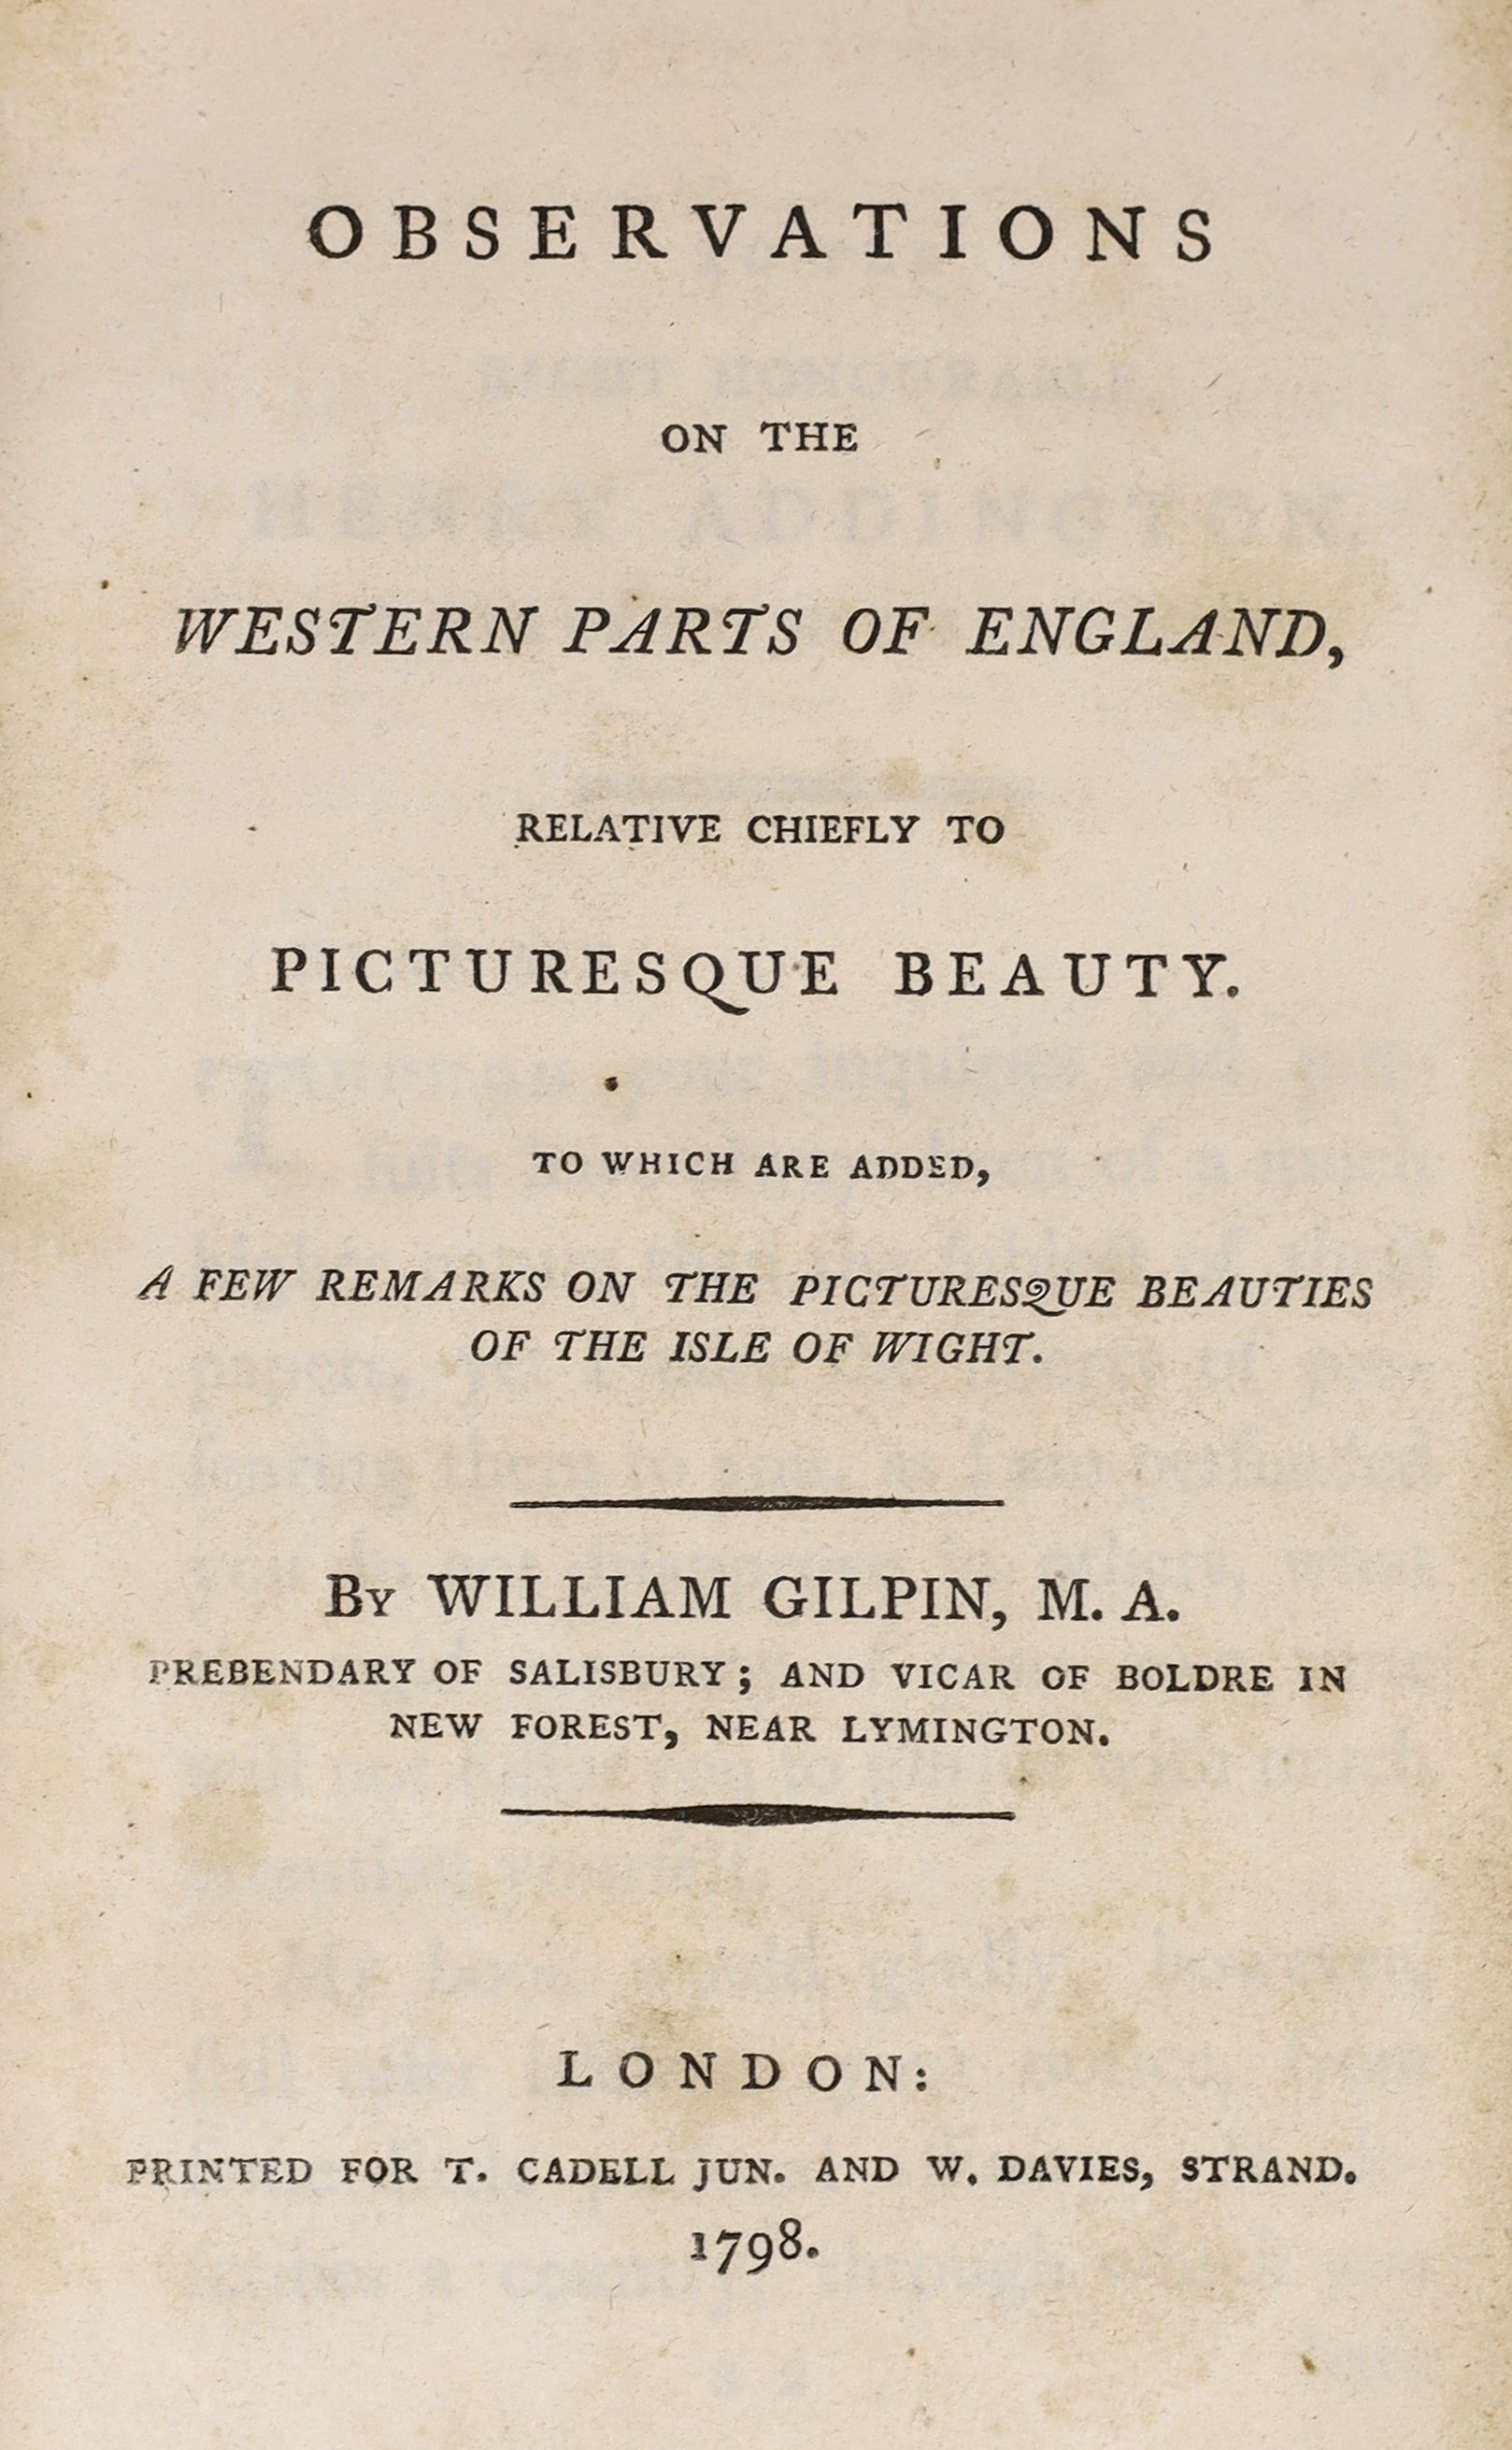 Gilpin, William - Observations on the Western Parts of England relative chiefly to Picturesque Beauty, 8vo, burr calf, with 18 tinted plates, T. Cadell & W. Davies, London, 1798; Socialism. - Utopia - Morris, William - N